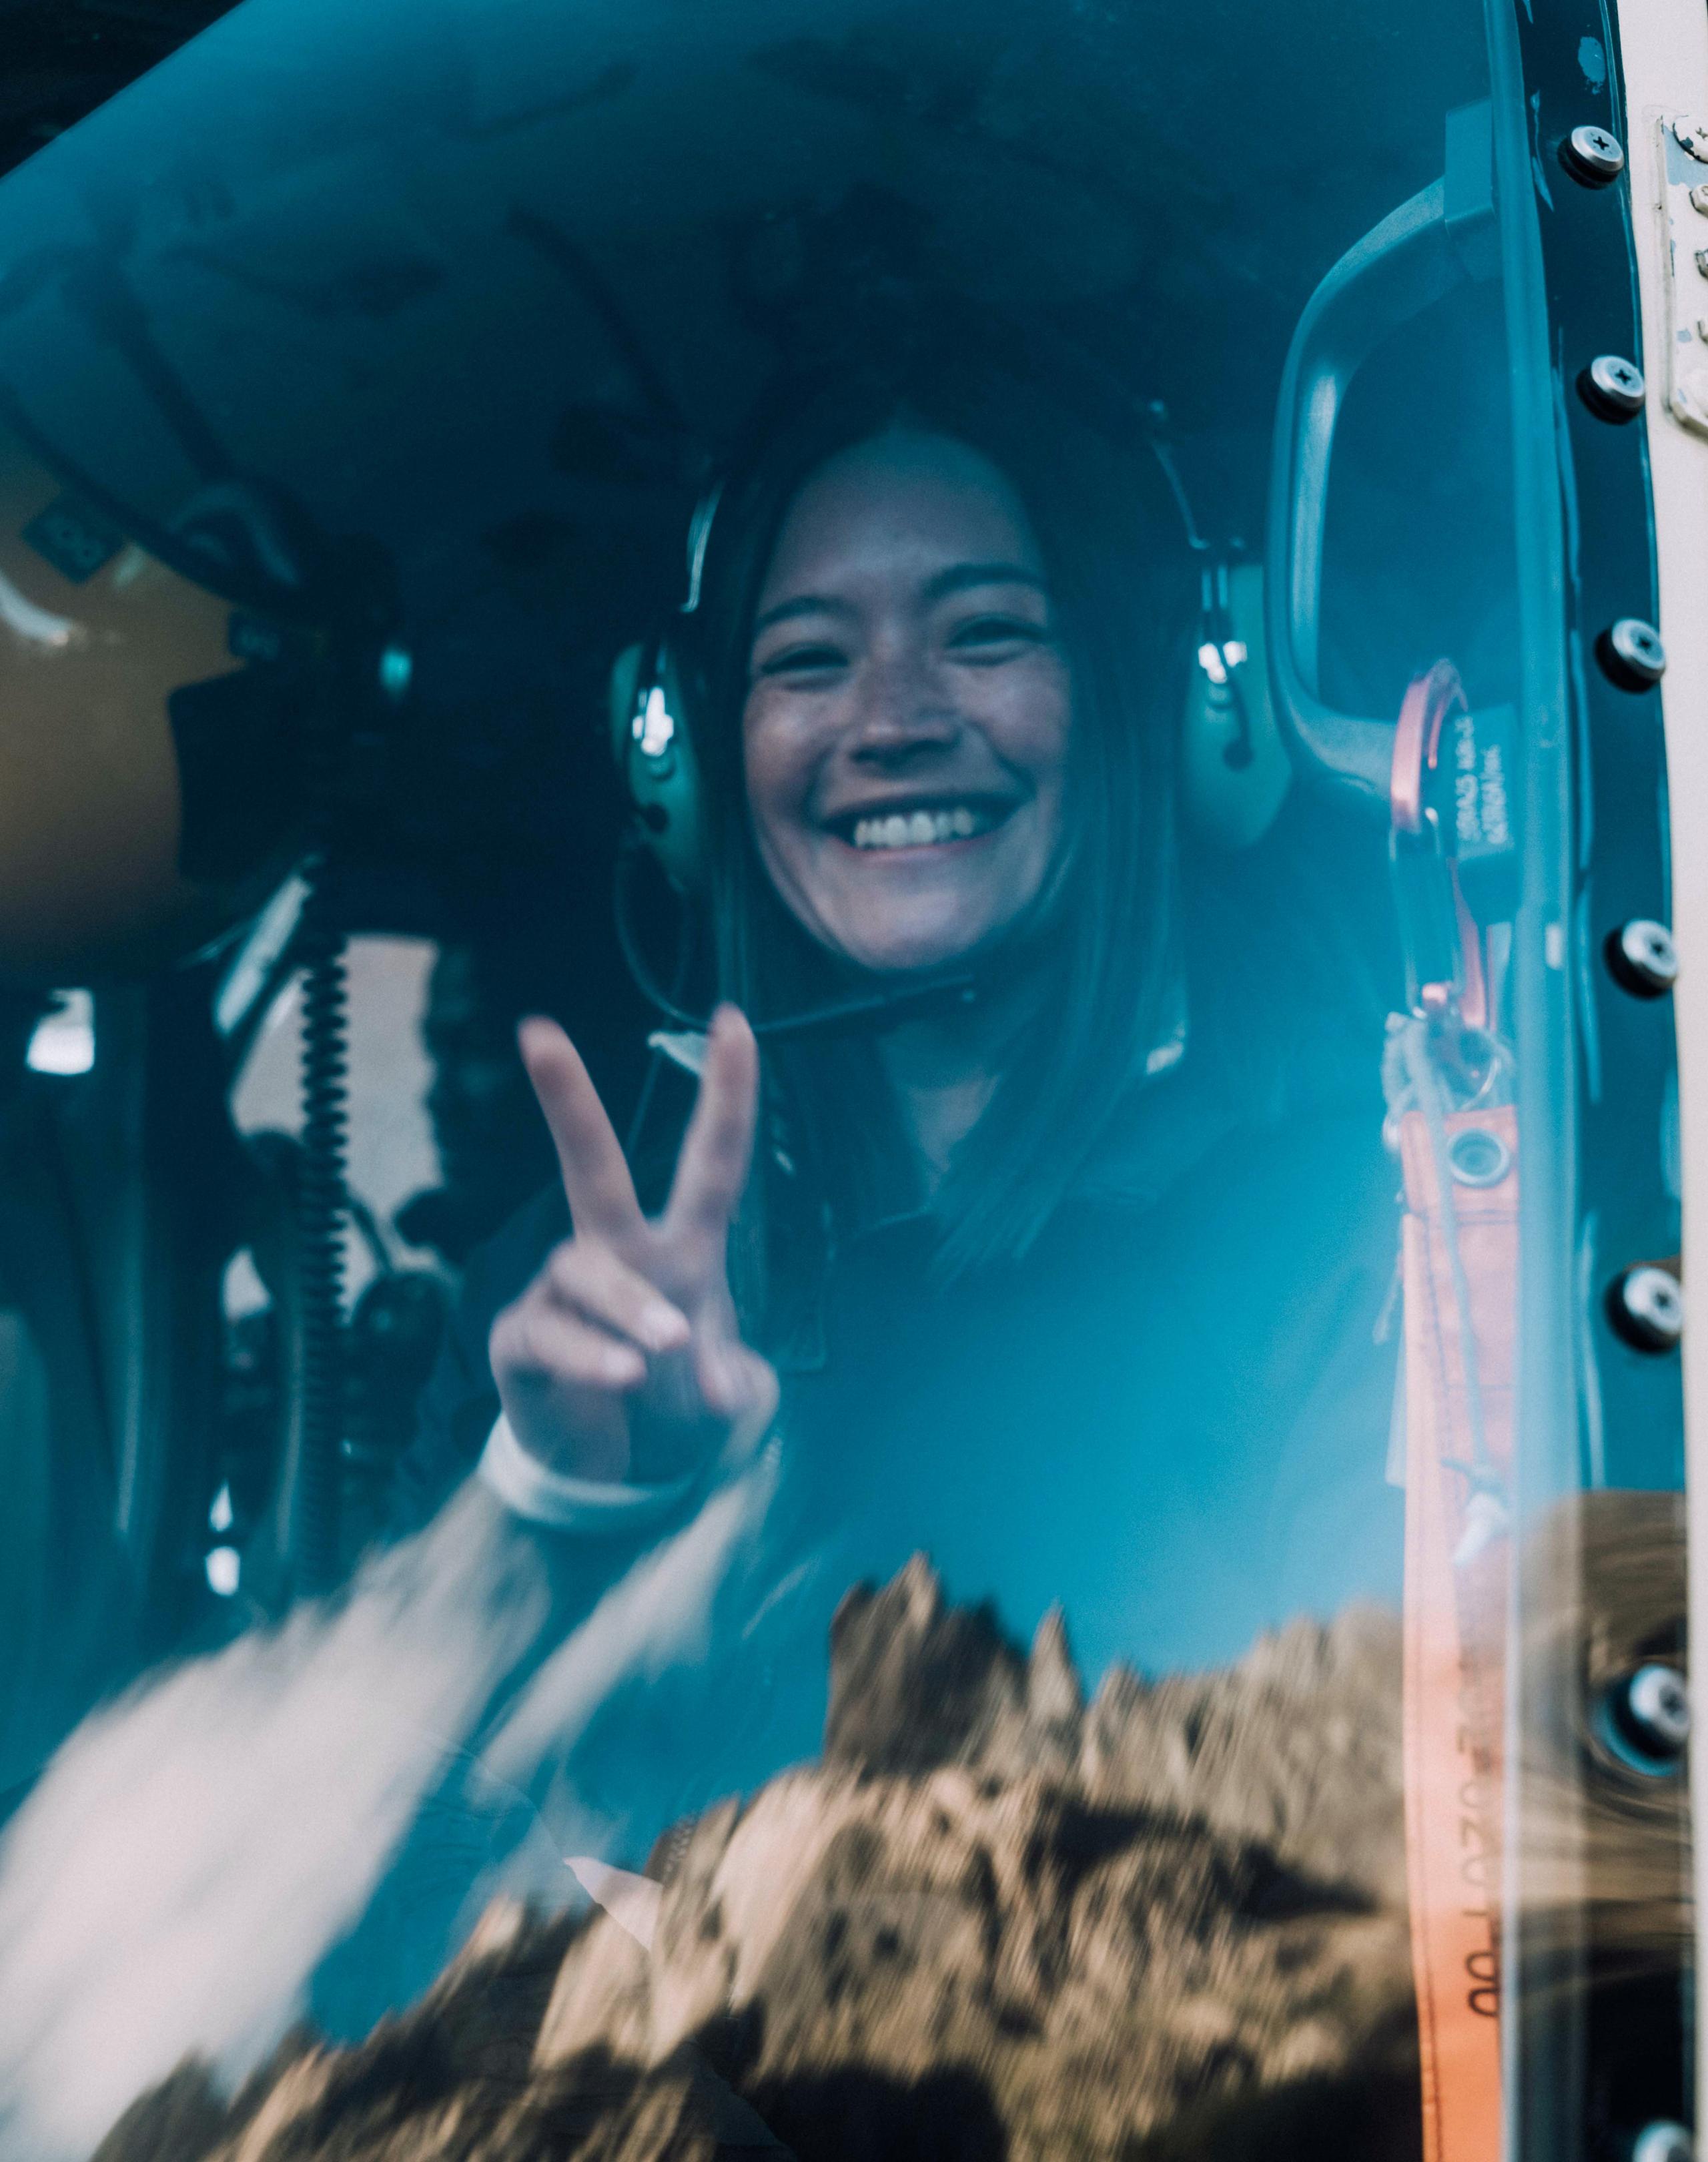 Woman giving peace sign and smiling from inside helicopter